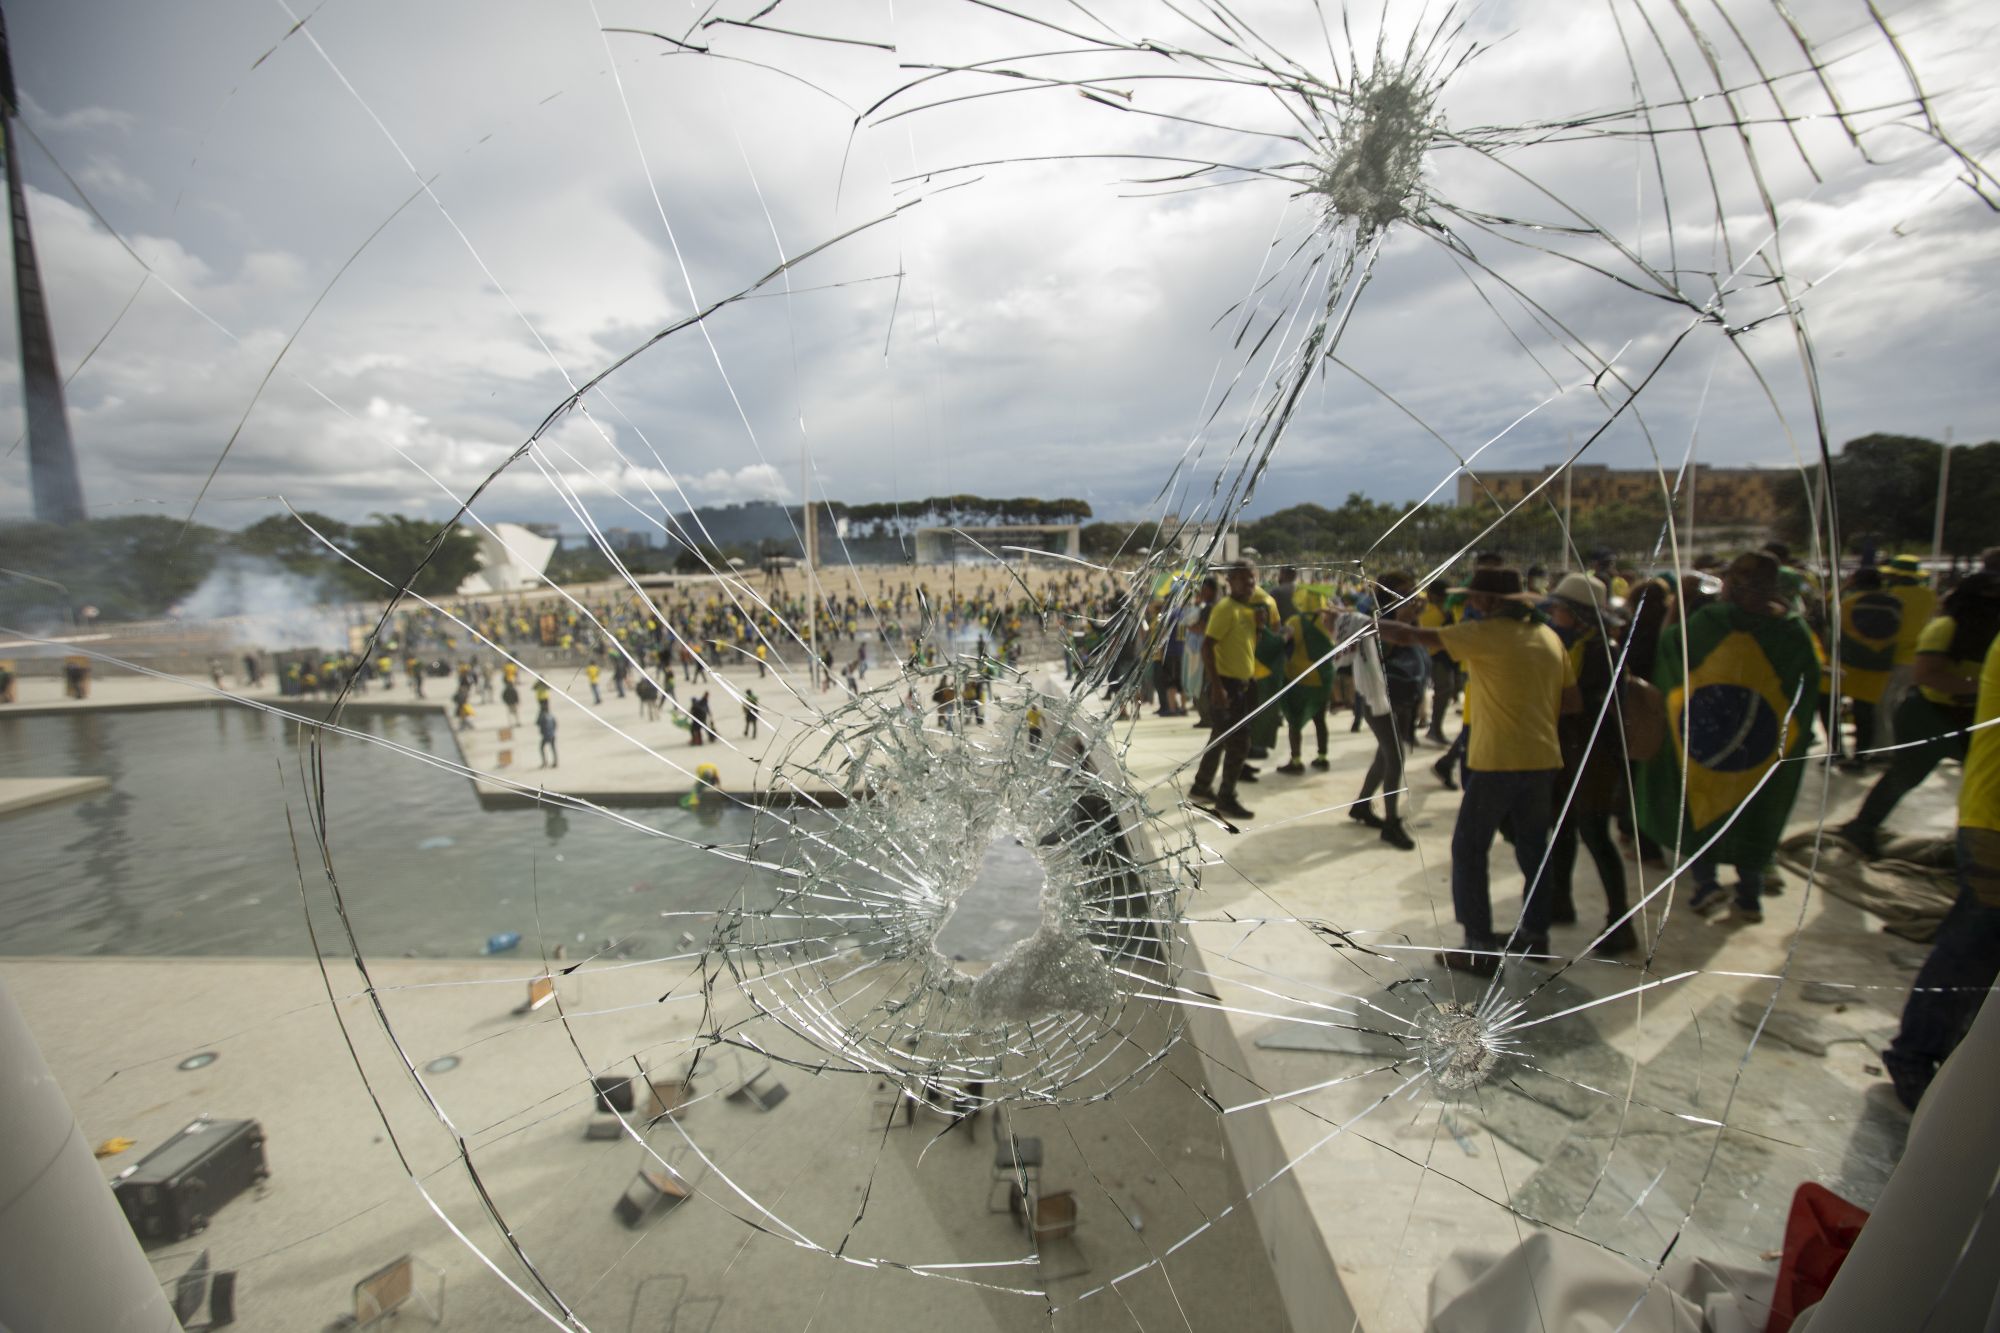 Supporters of former President Jair Bolsonaro clash with security forces. Joedson Alves/Anadolu Agency via Getty Images